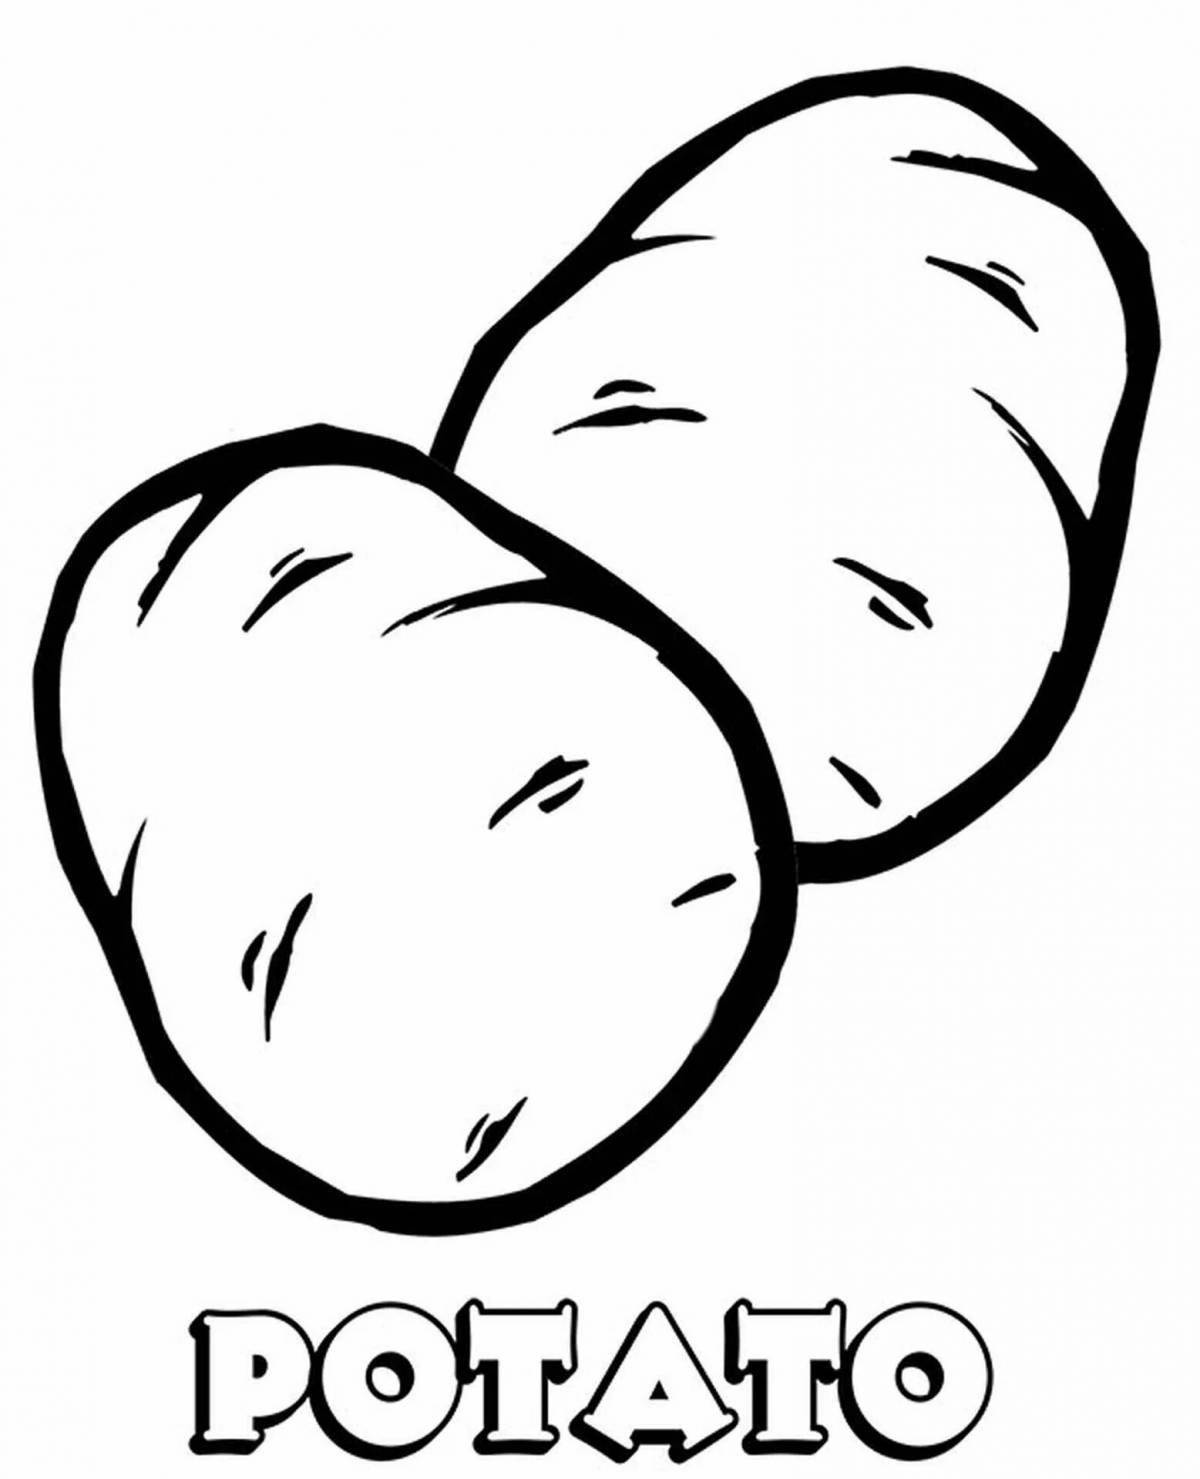 Creative potato coloring pages for kids